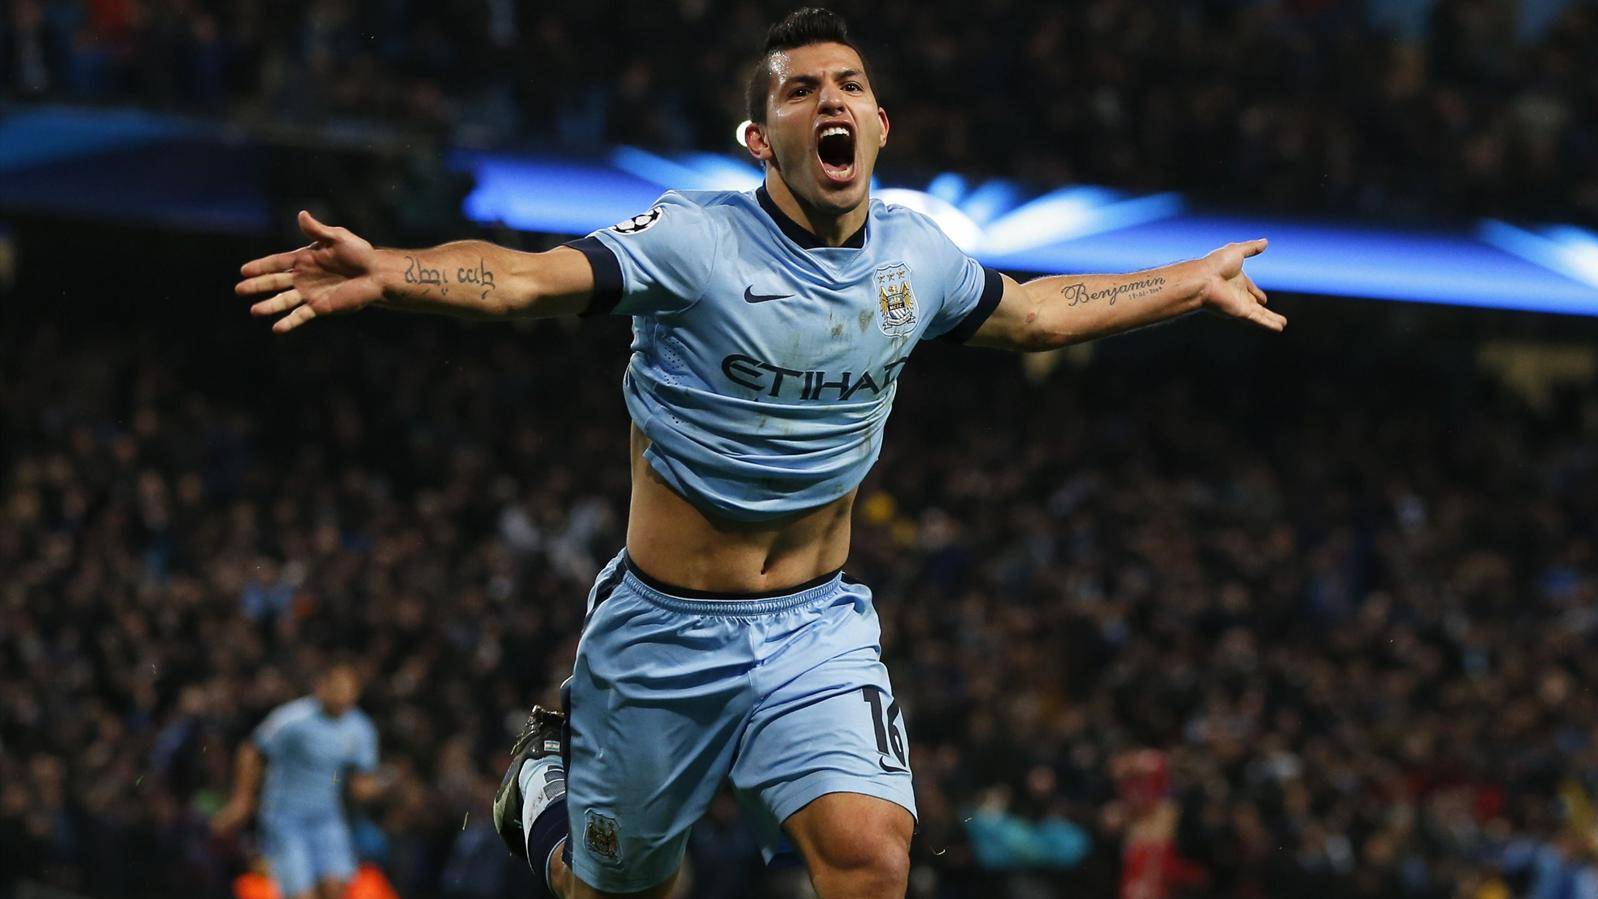 The "Kun" Agüero, celebrating a goal with the Manchester City